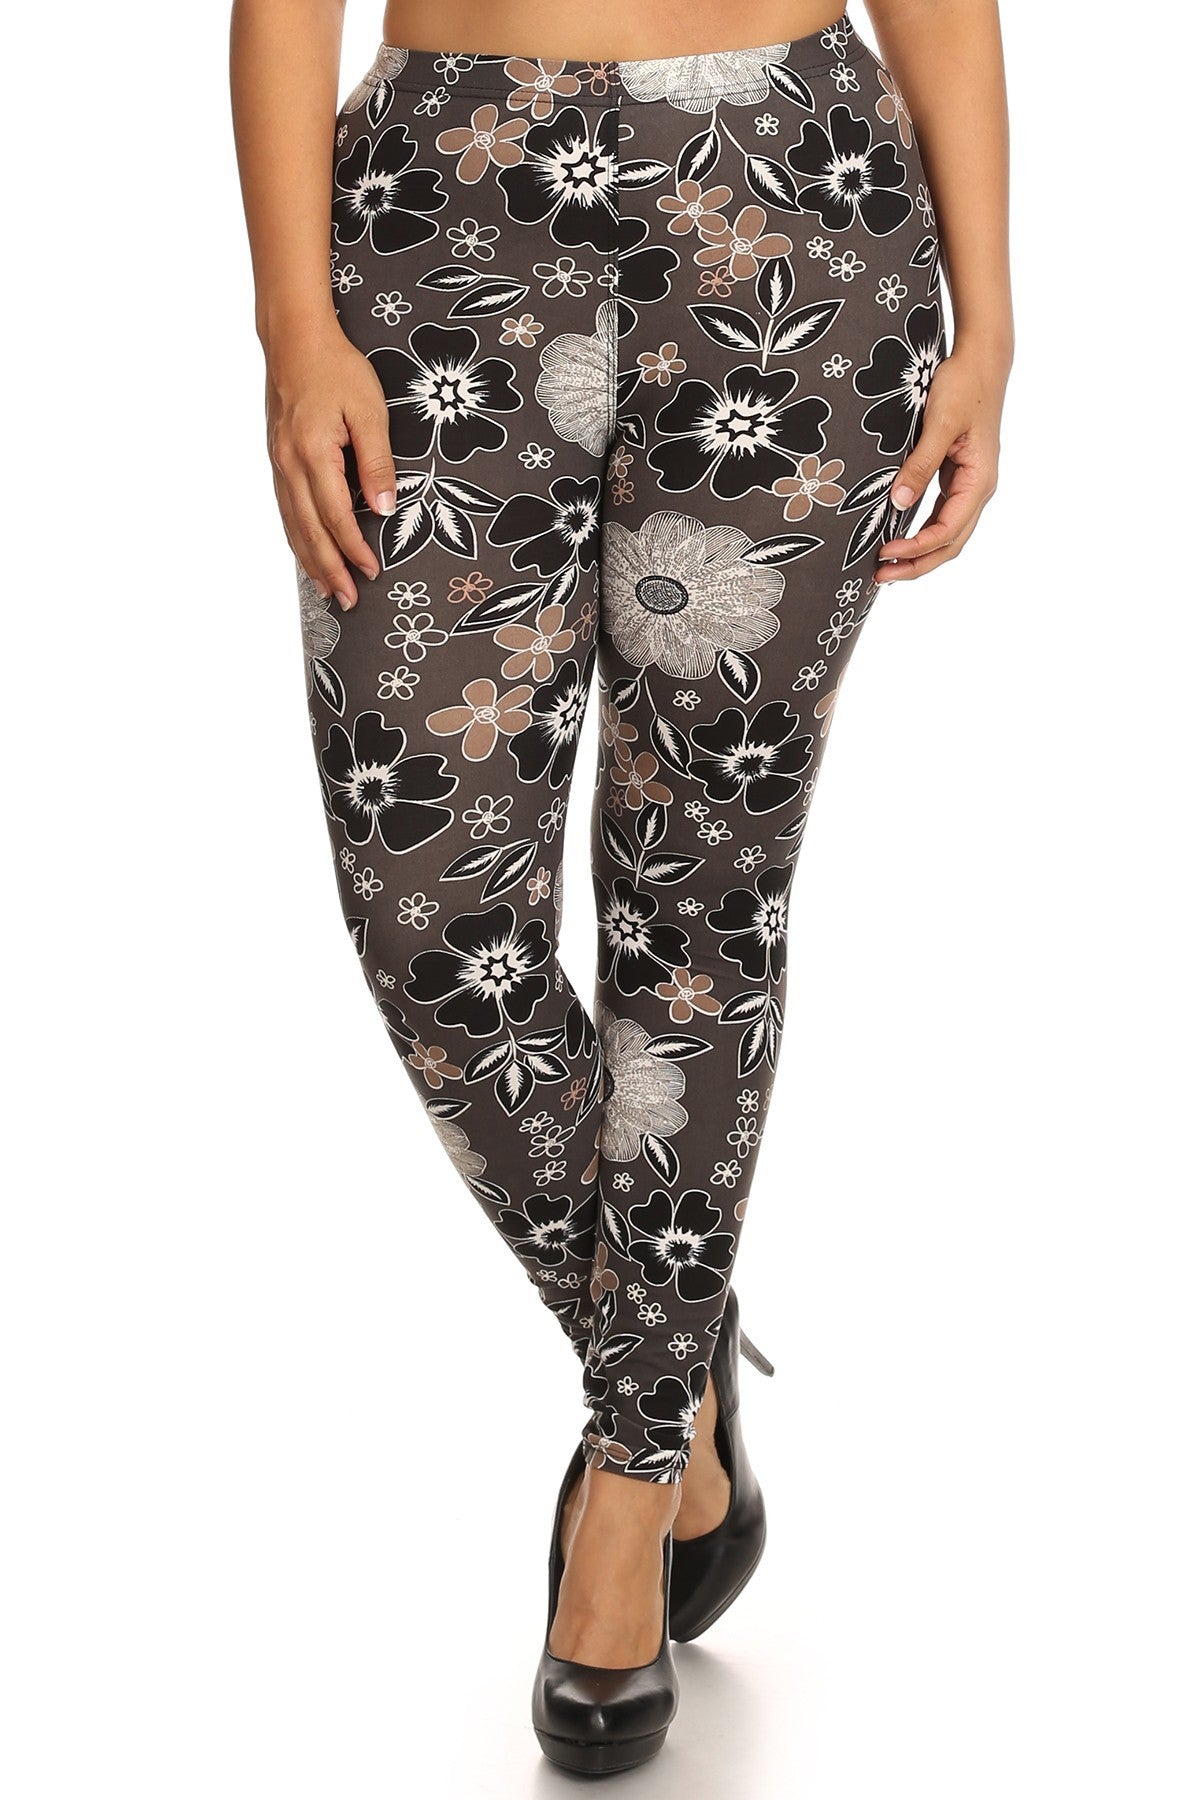 Plus Size Floral Graphic Printed Knit Legging With Elastic Waist Detail. High Waist Fit